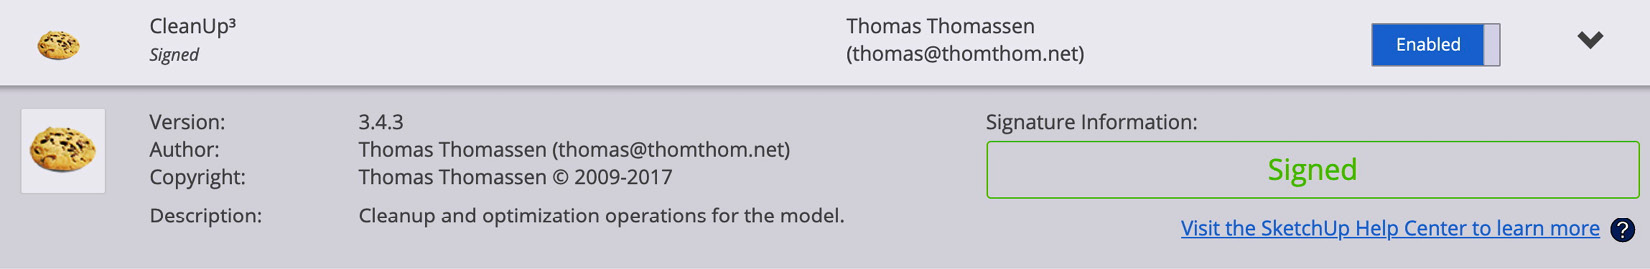 Figure 12.18 – Extension information for Thomthom’s CleanUp3
